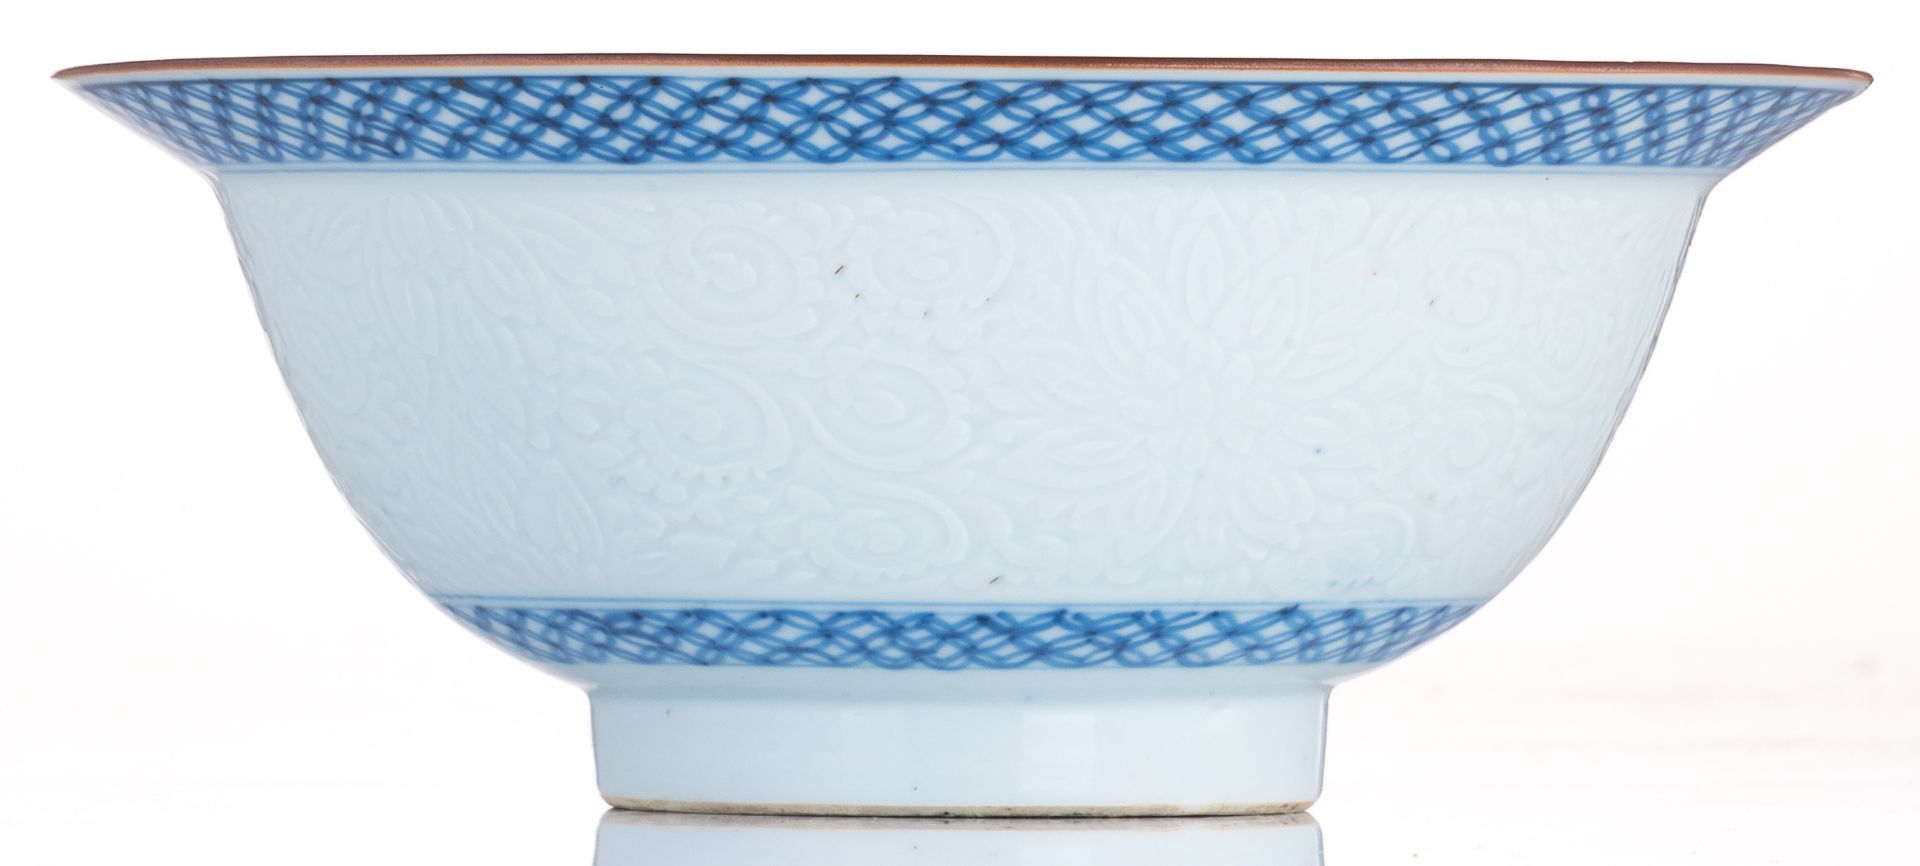 A Chinese porcelain blue and white bowl with a small flat rim, Kangxi (ca 1690-1722), H 8 - ø 20 cm - Image 4 of 7